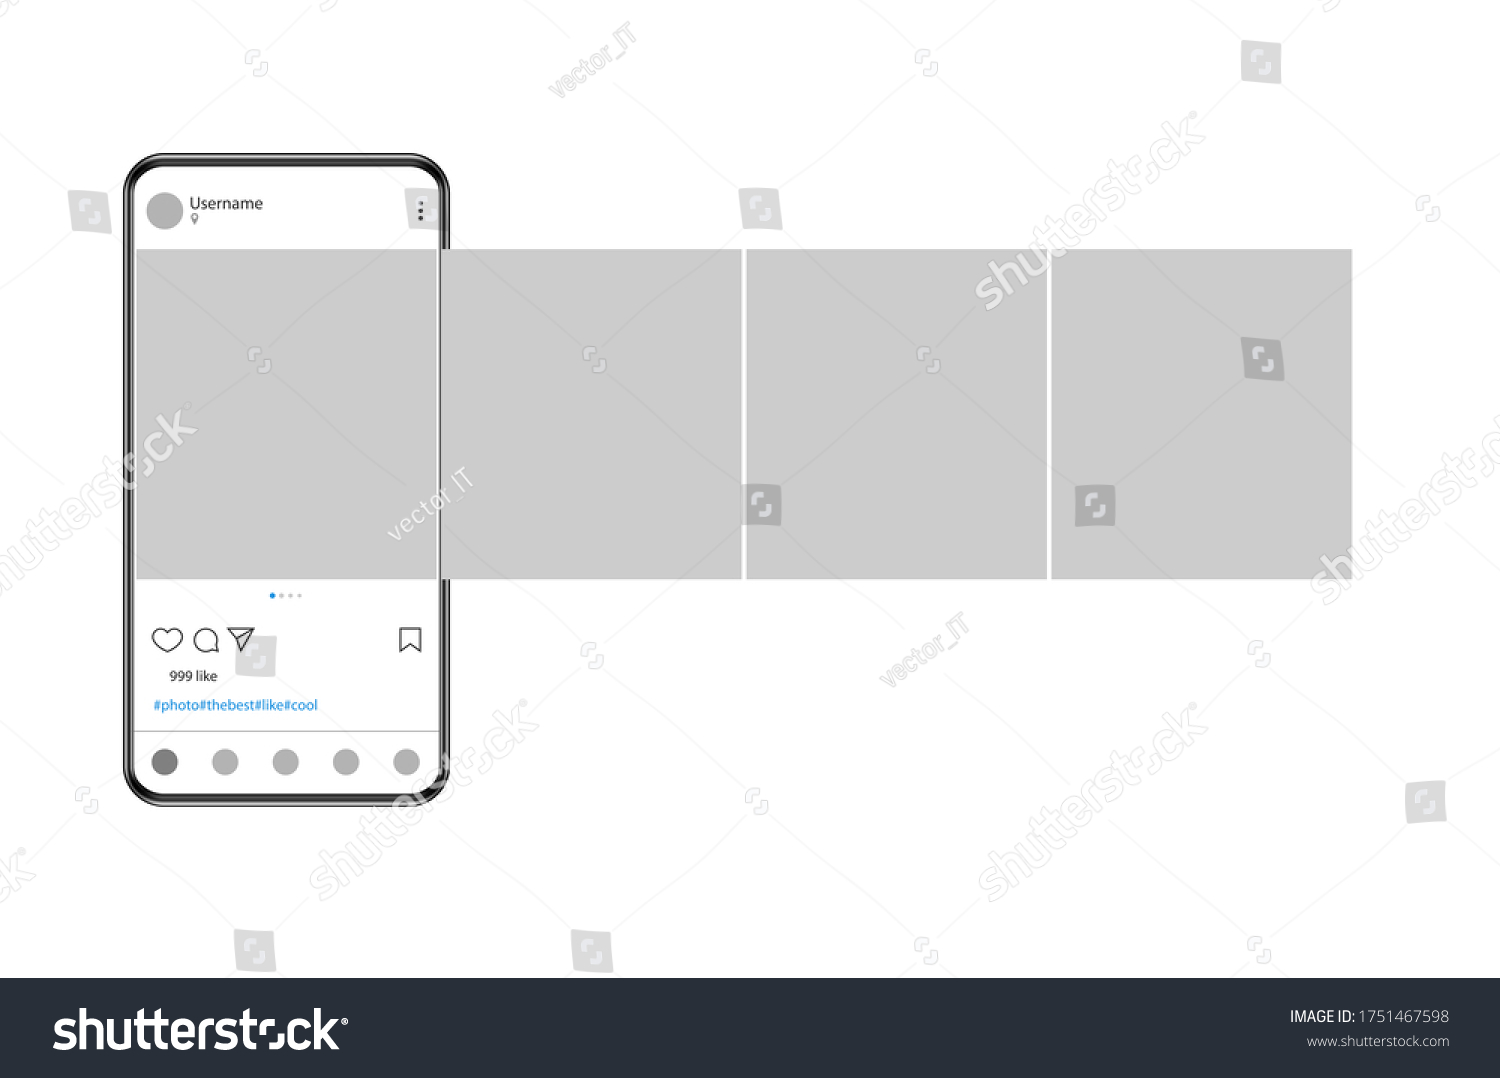 Internet application on the screen of a real smartphone. Post carousel on social media. Vector illustration. #1751467598